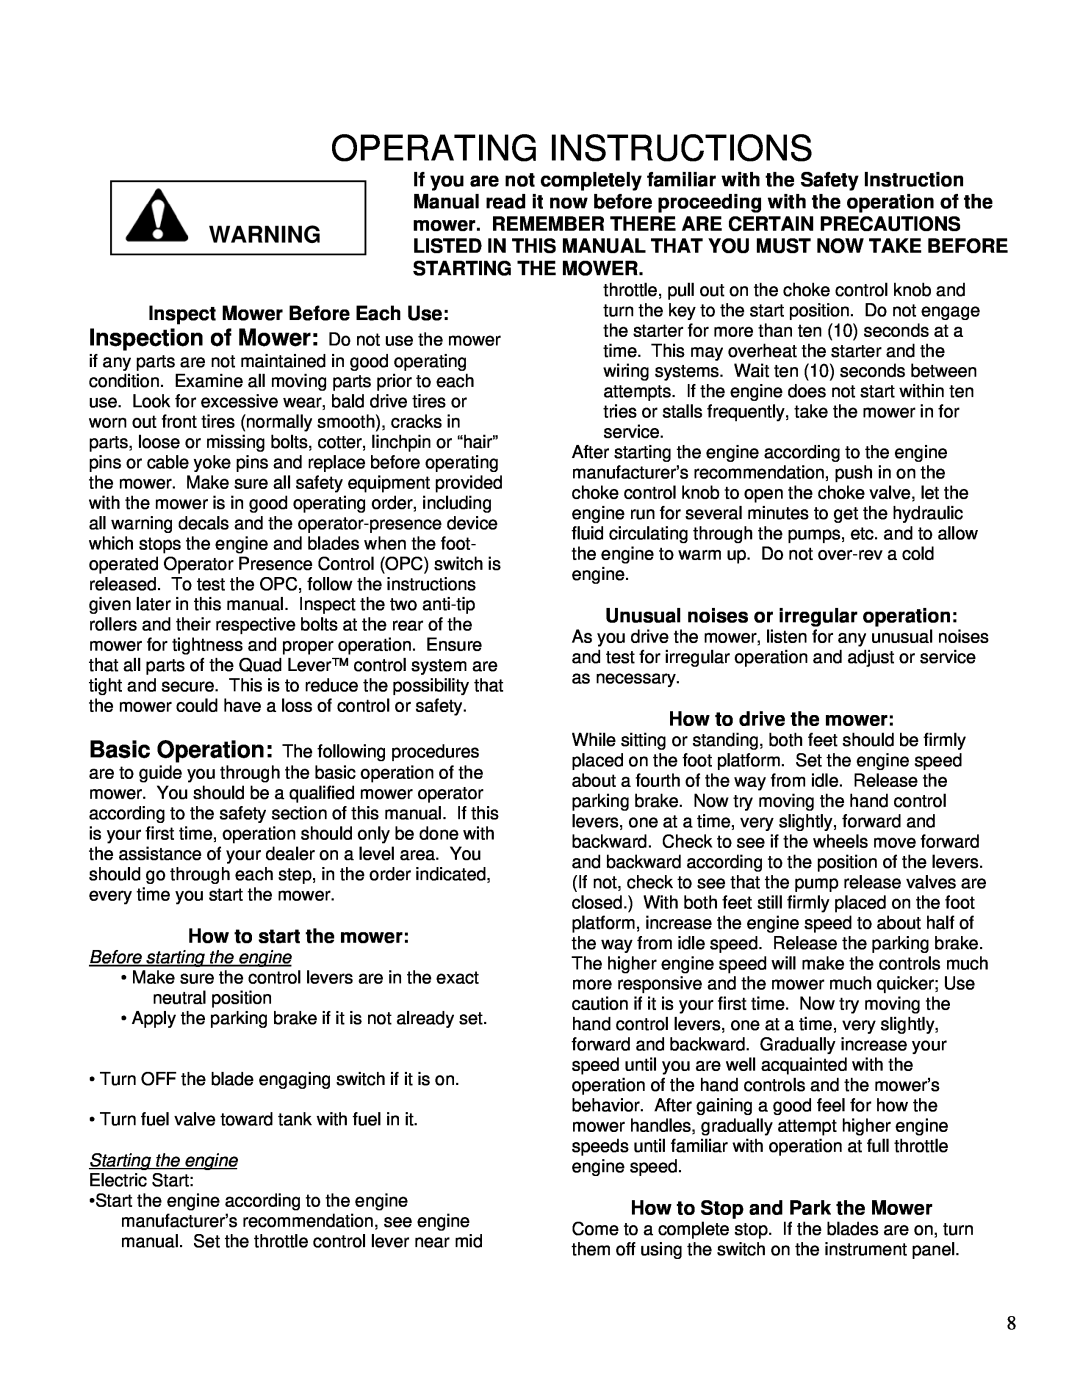 Wright Manufacturing 26980 Operating Instructions, Inspection of Mower Do not use the mower, Inspect Mower Before Each Use 